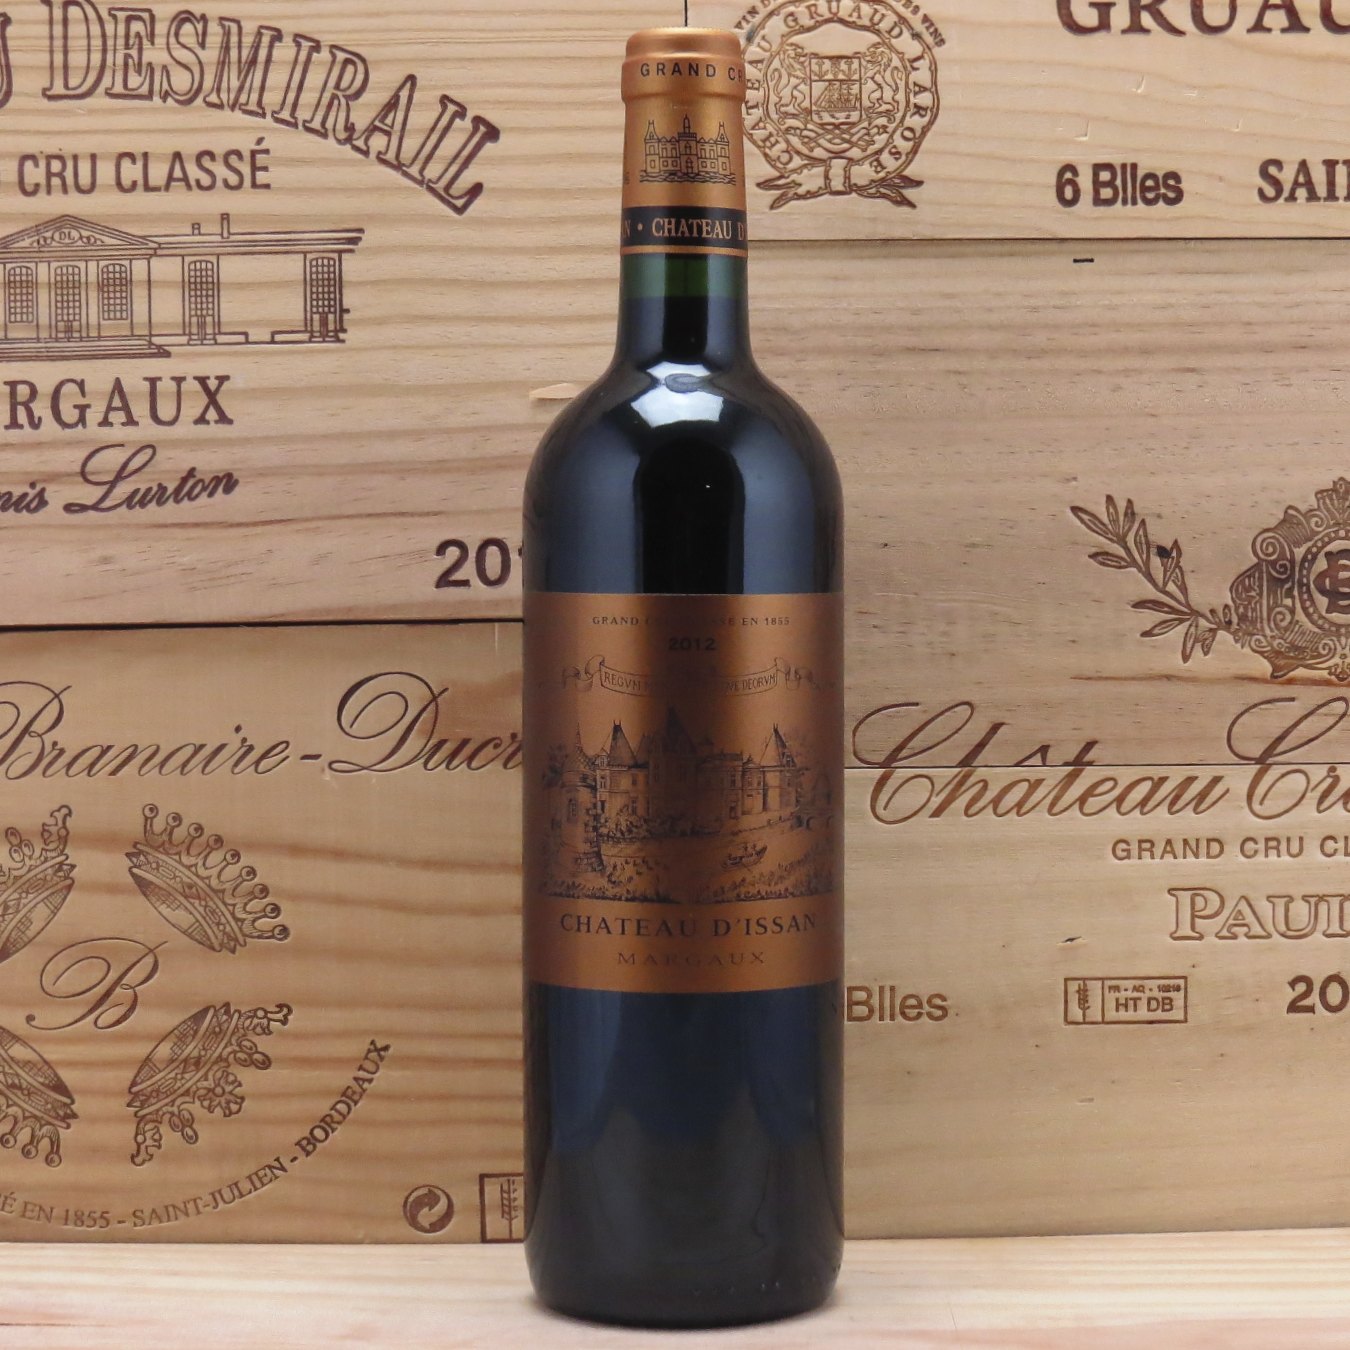 2012 Chateau d'Issan